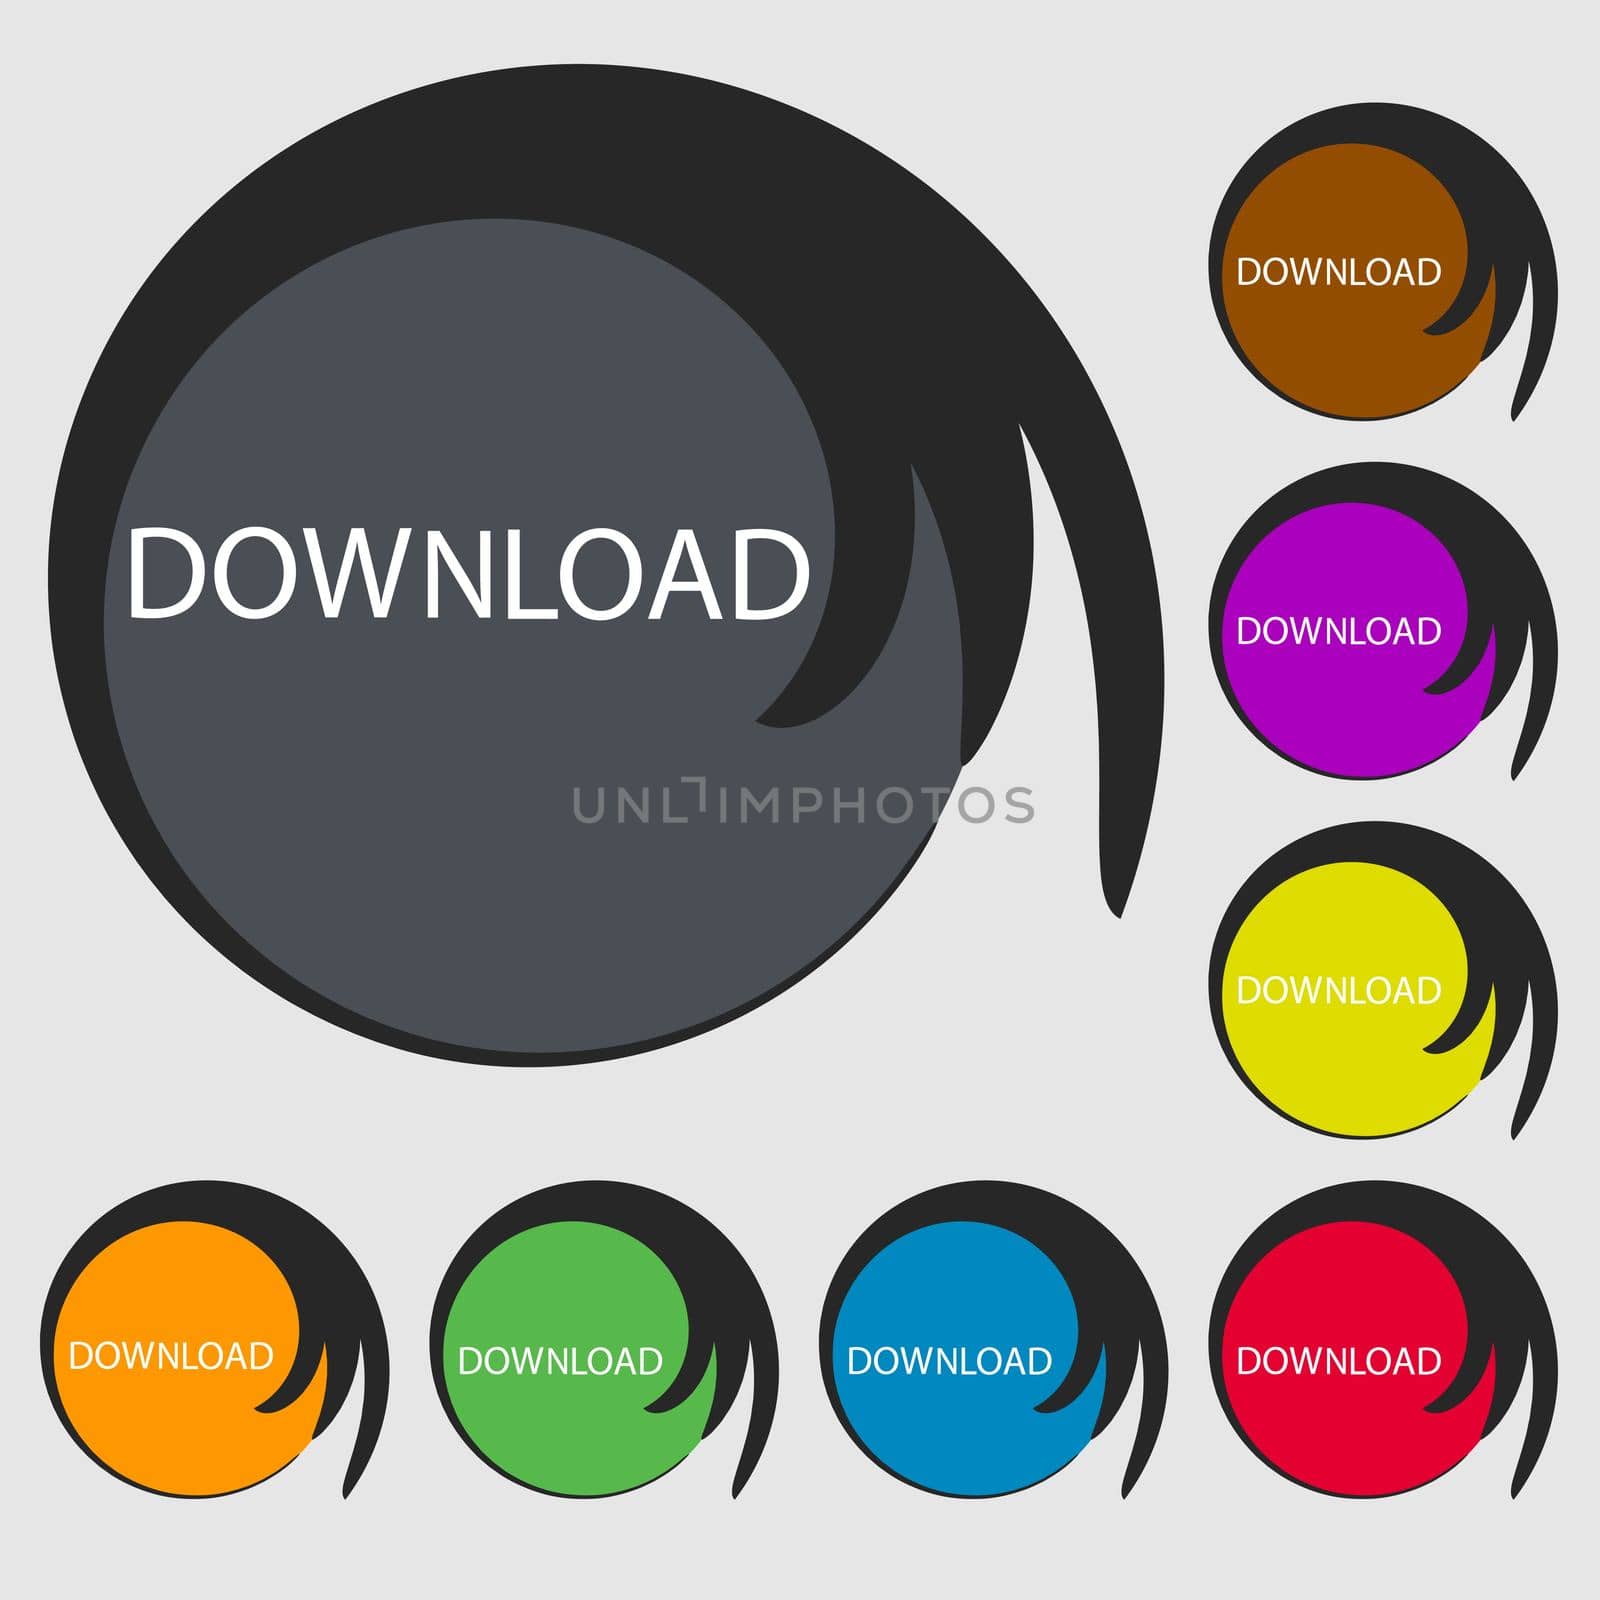 Download icon. Upload button. Load symbol. Symbols on eight colored buttons. illustration